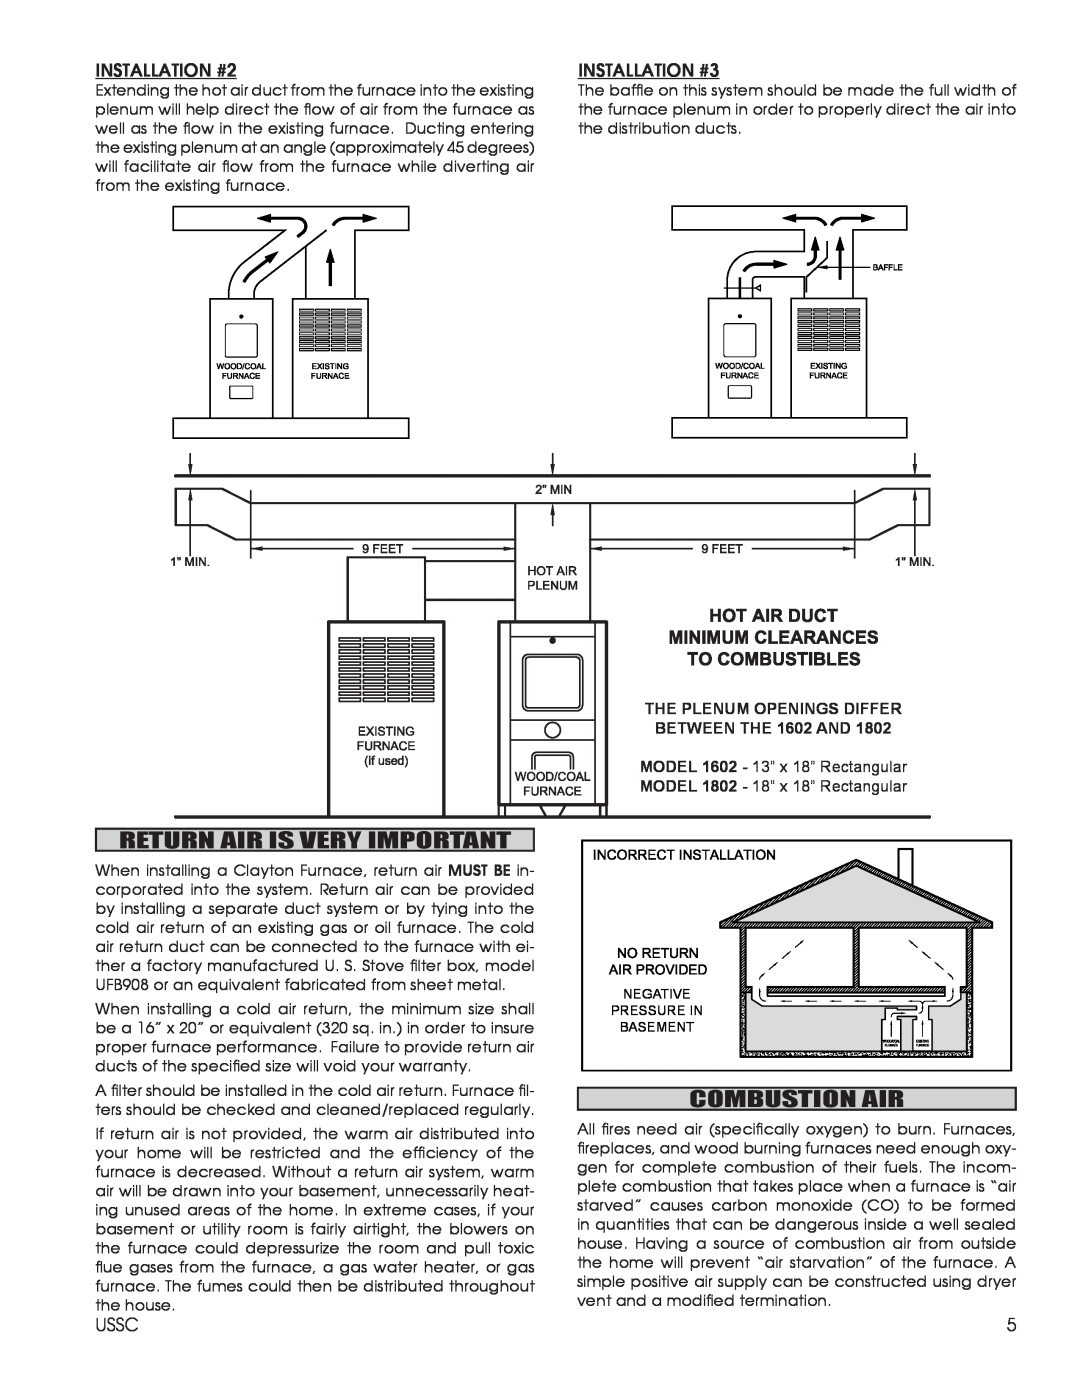 United States Stove 1602G, 1802G Return Air Is Very Important, Combustion Air, INSTALLATION #2, INSTALLATION #3 